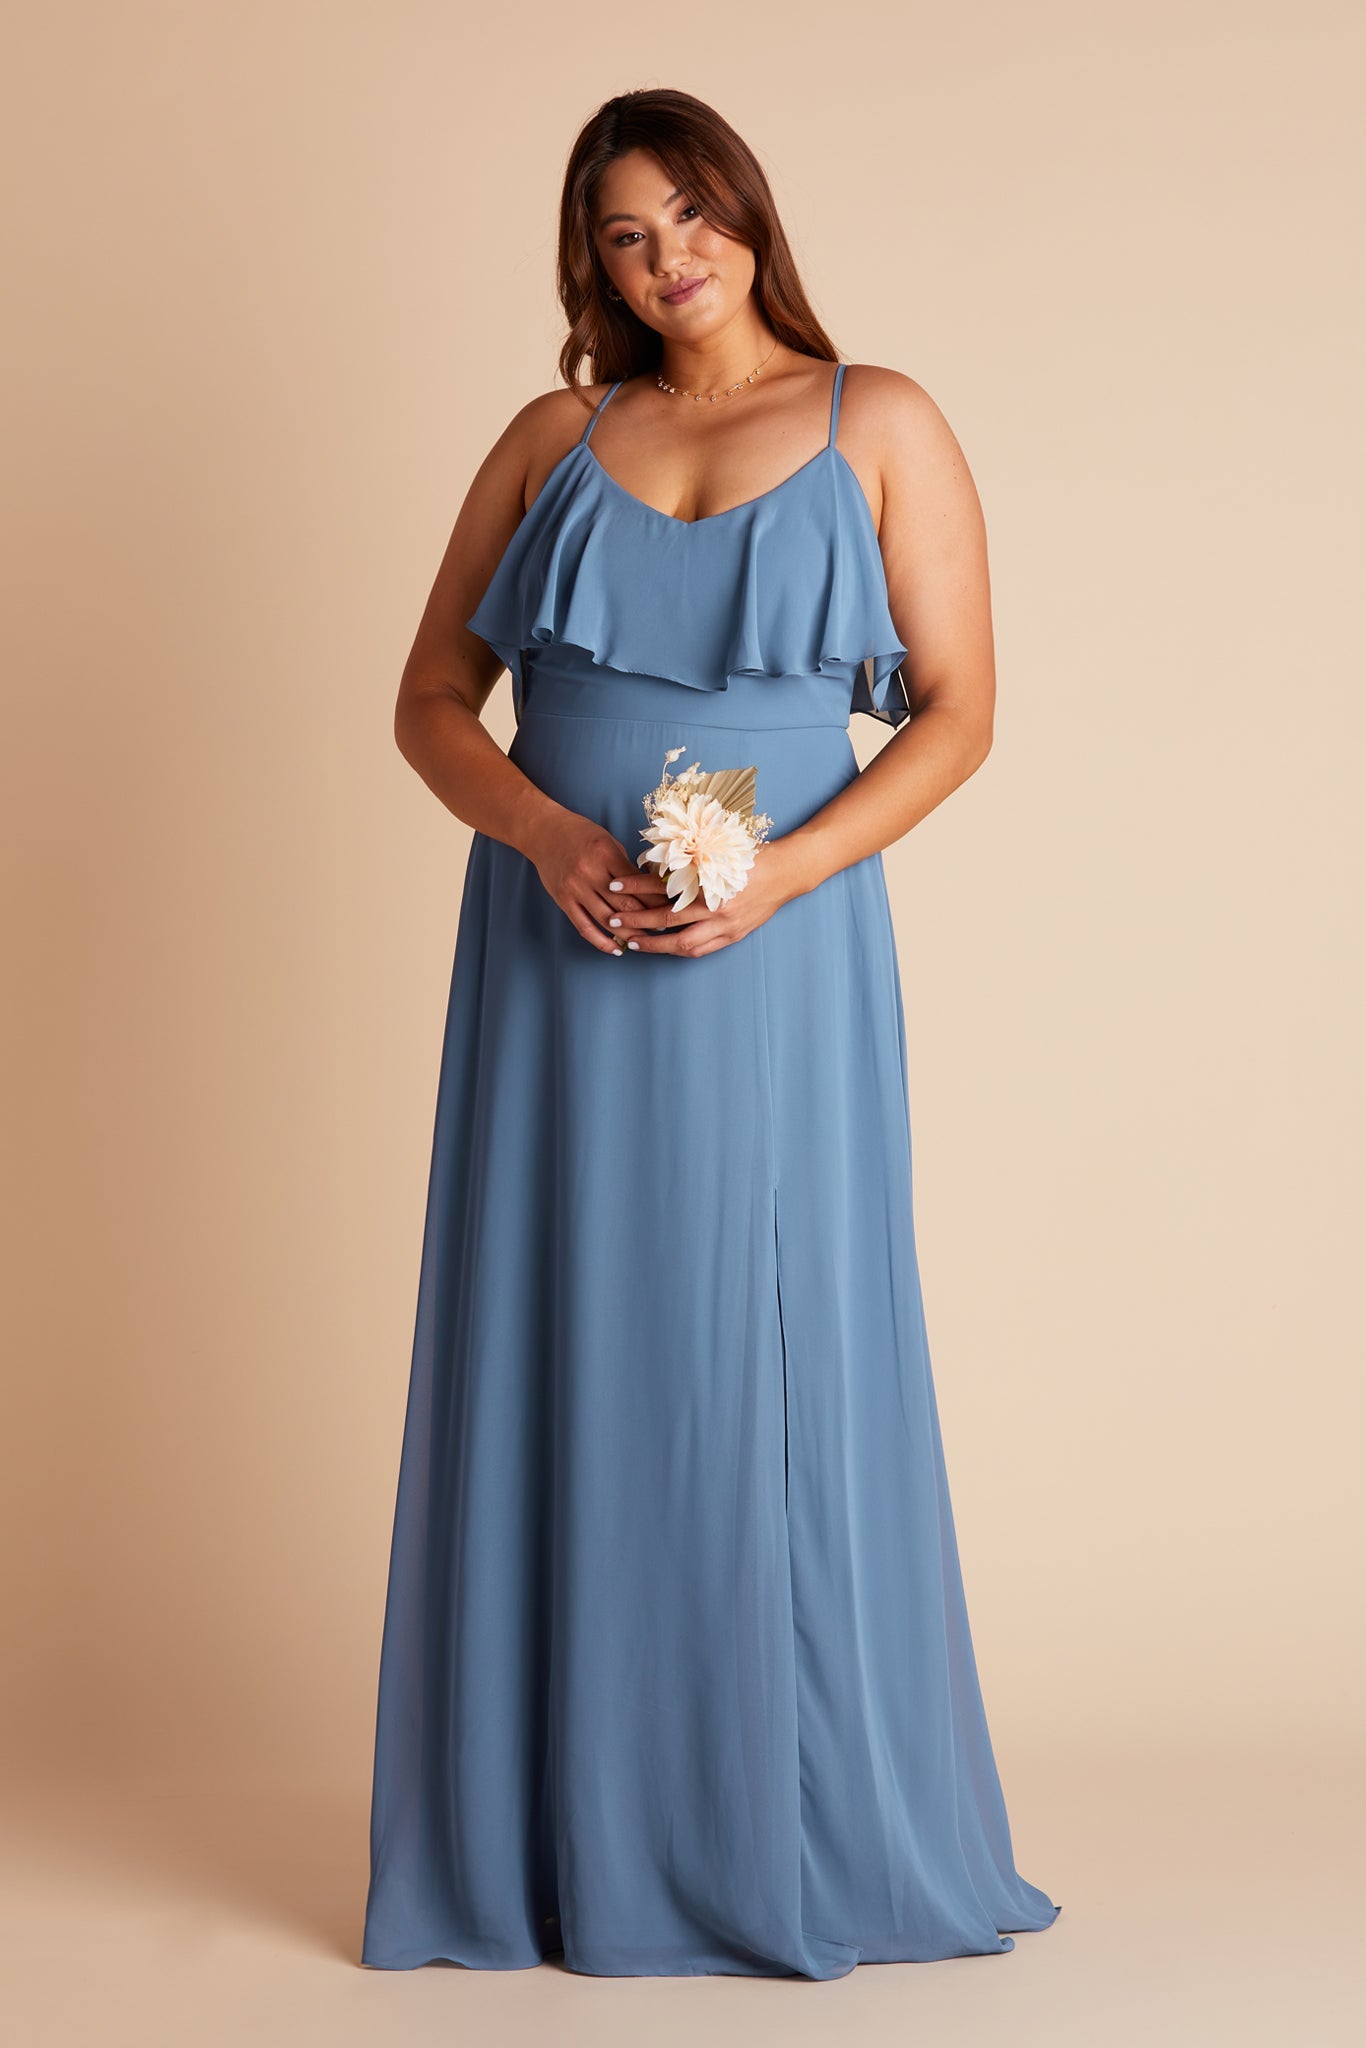 Jane convertible plus size bridesmaid dress in twilight blue chiffon by Birdy Grey, front view